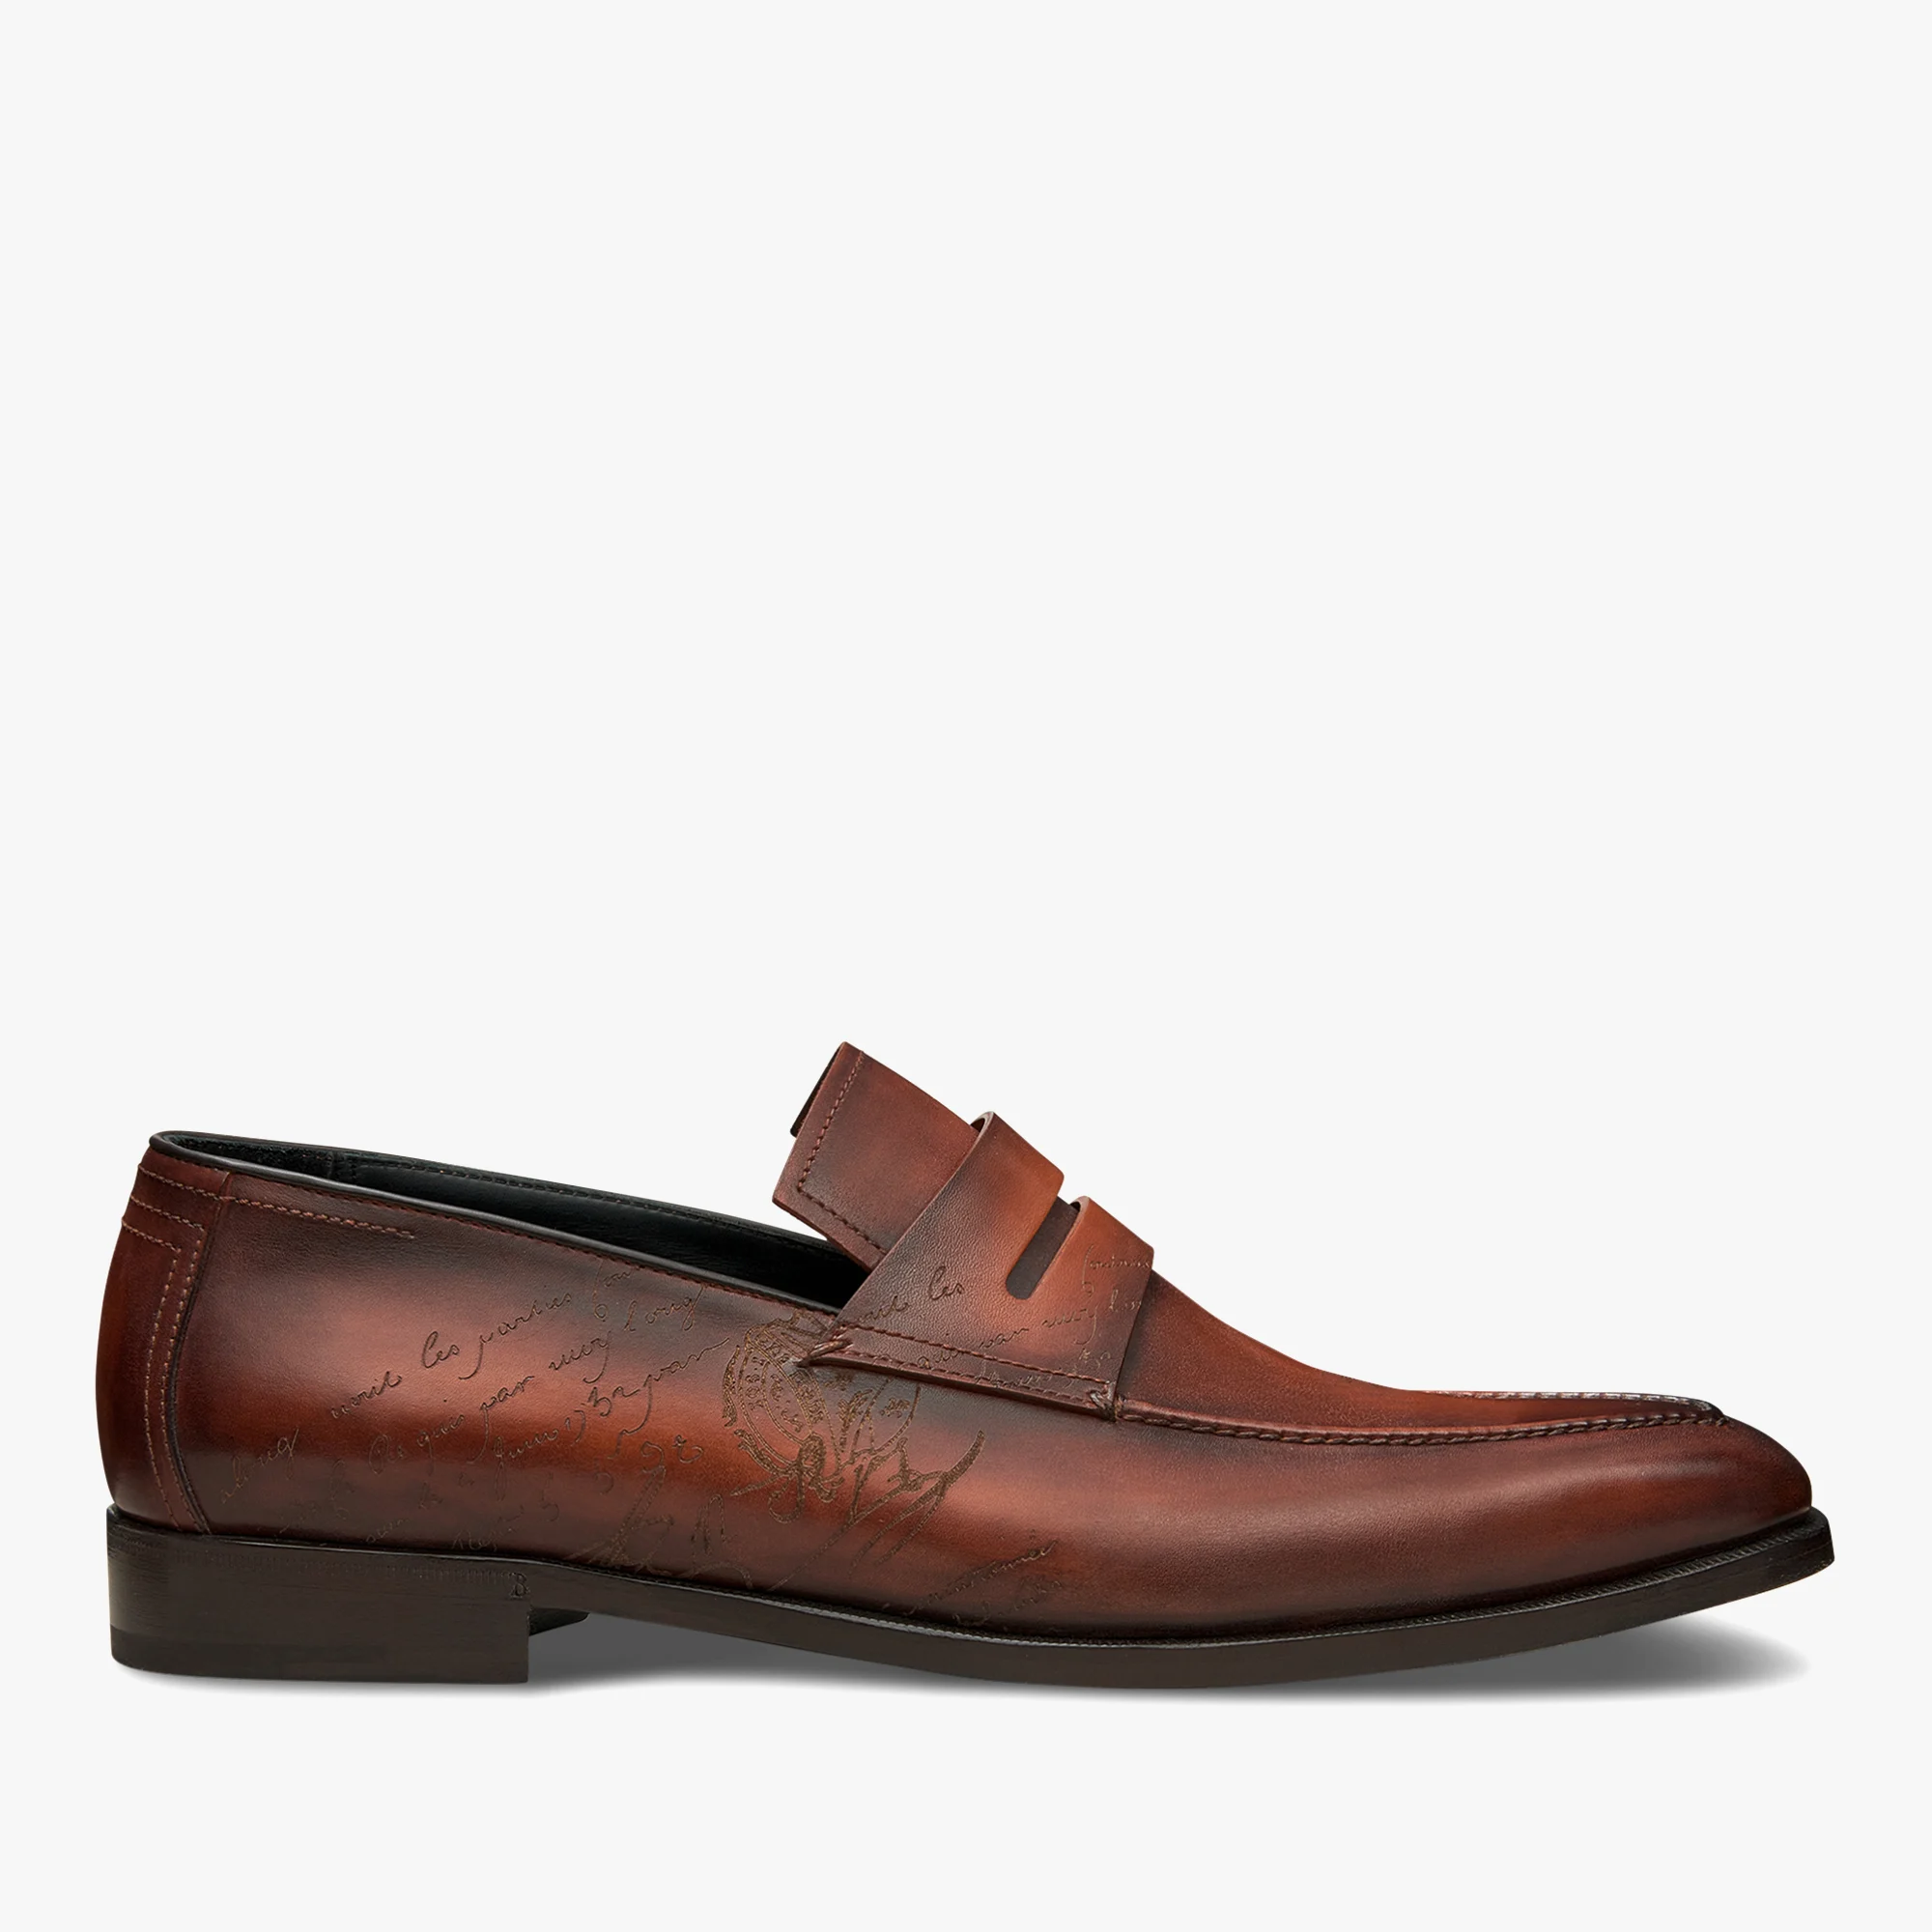 Andy Démesure Neo Scritto Leather Loafer, CACAO INTENSO, hi-res